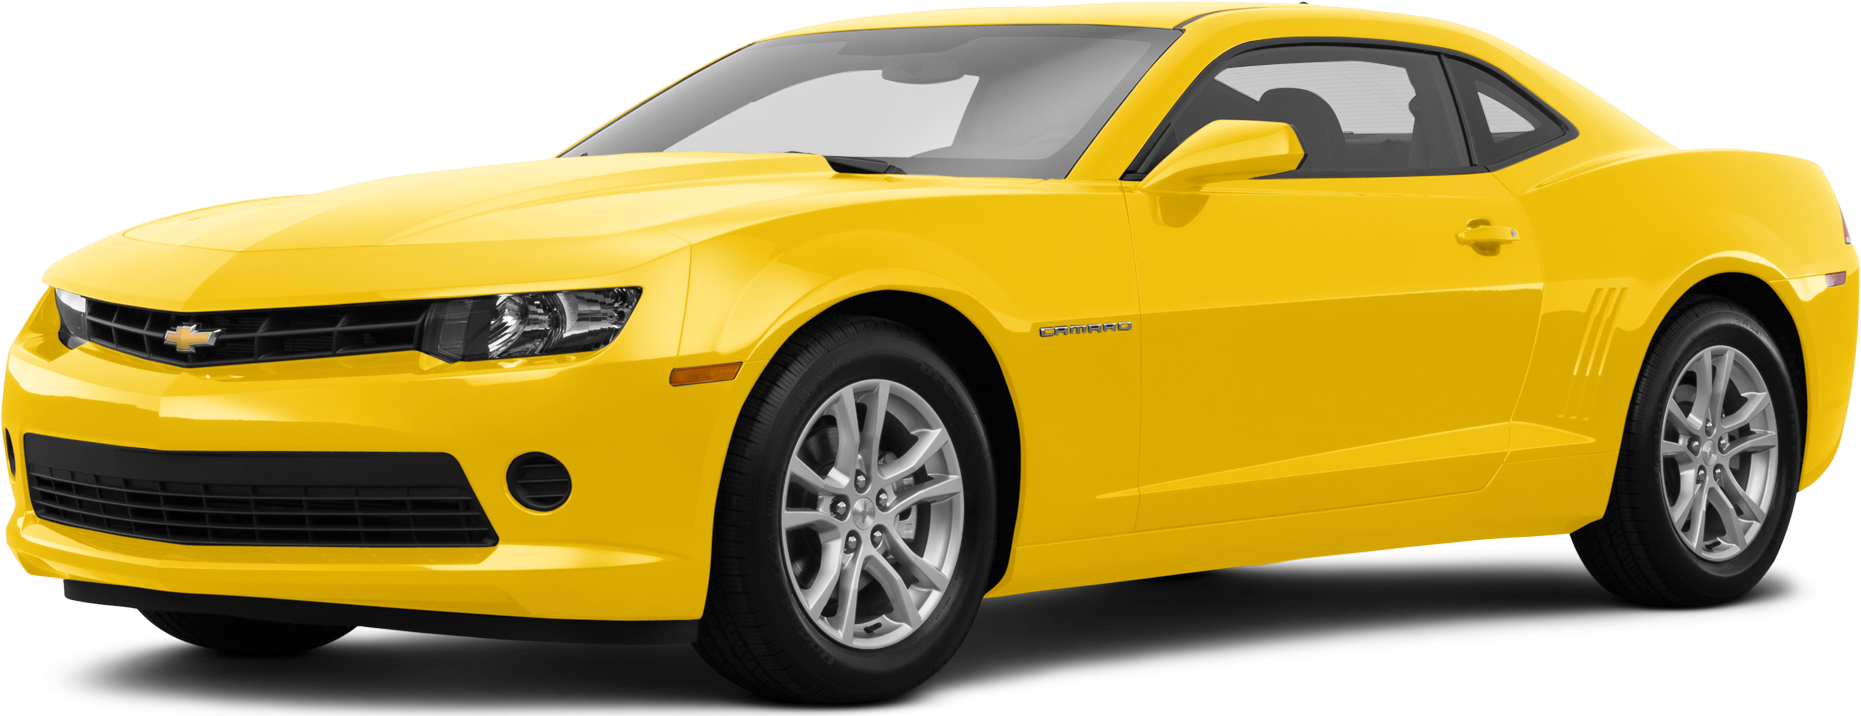 2015 Chevy Camaro Values & Cars for Sale | Kelley Blue Book